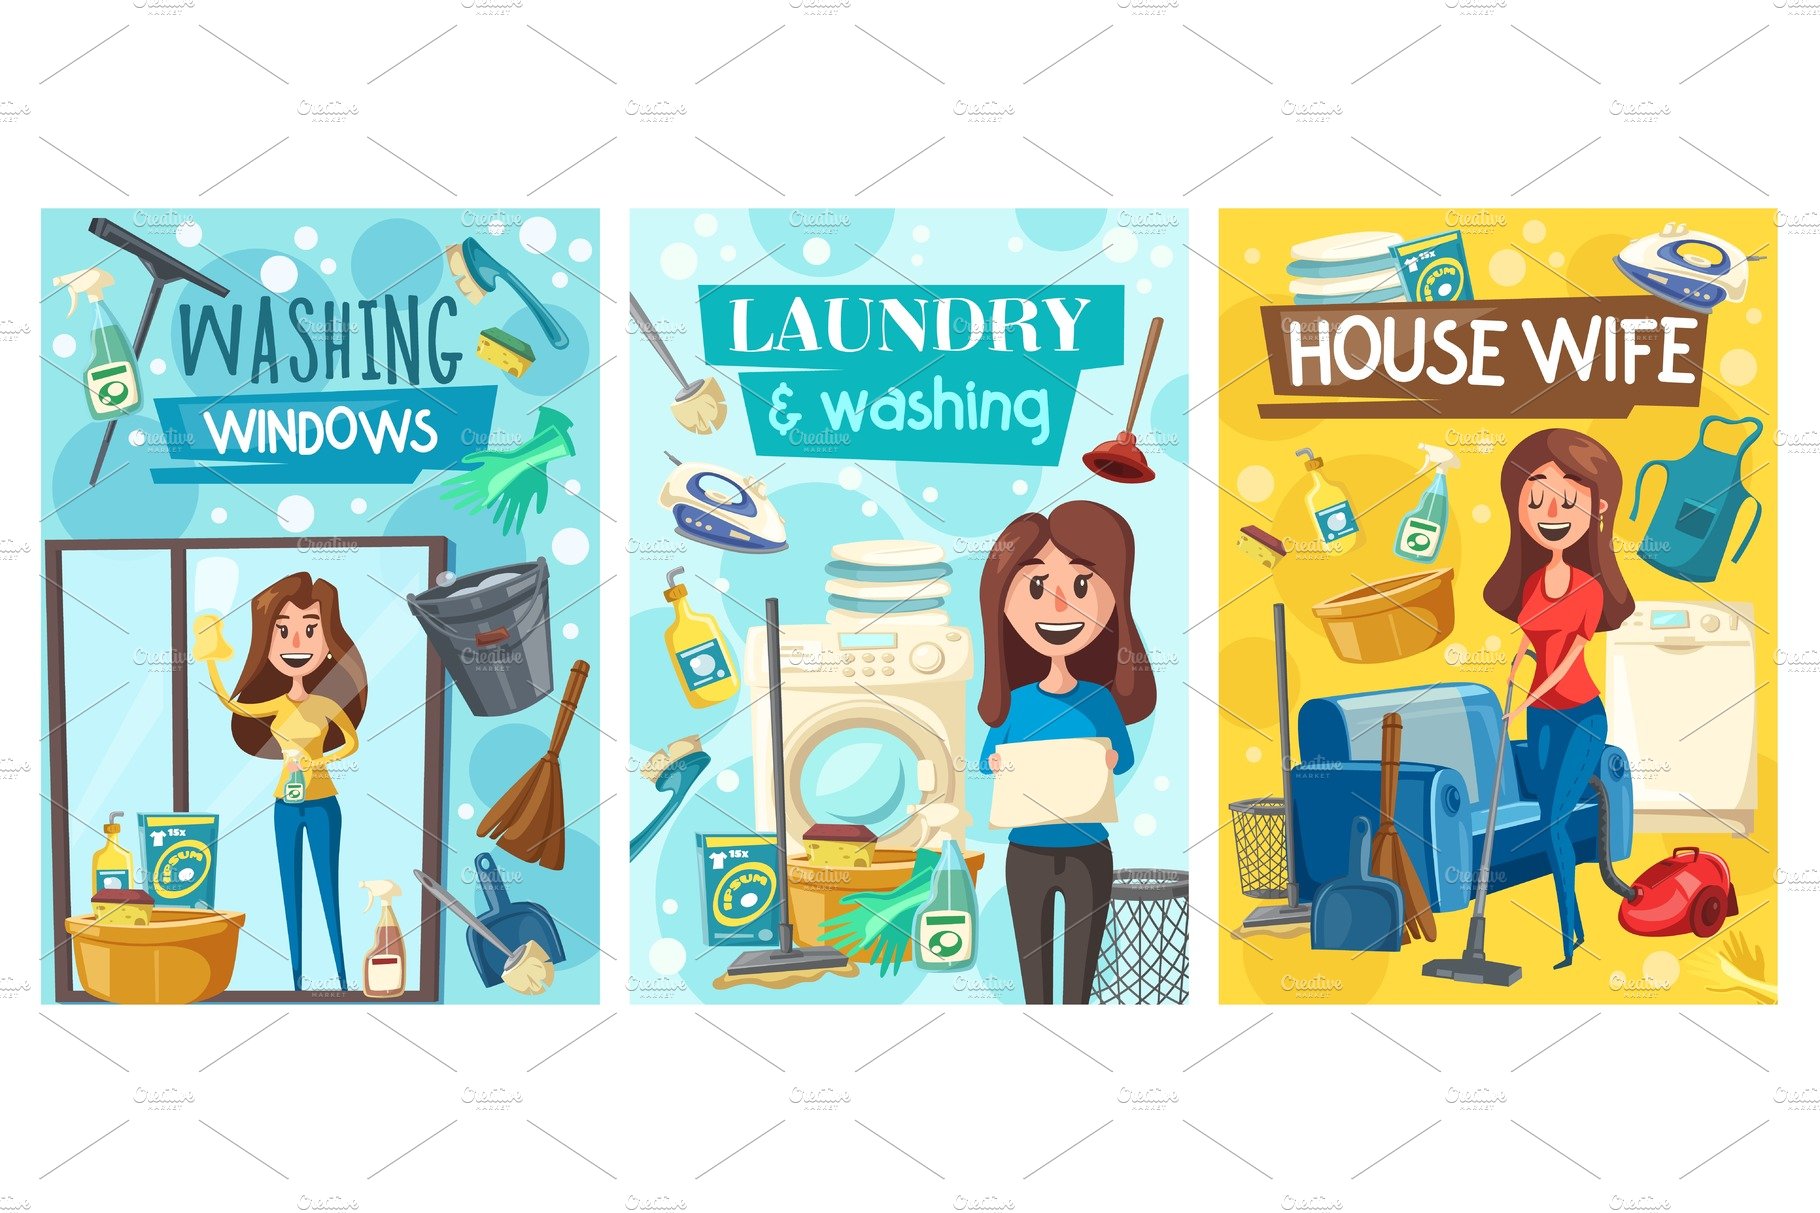 Home cleaning service, laundry cover image.